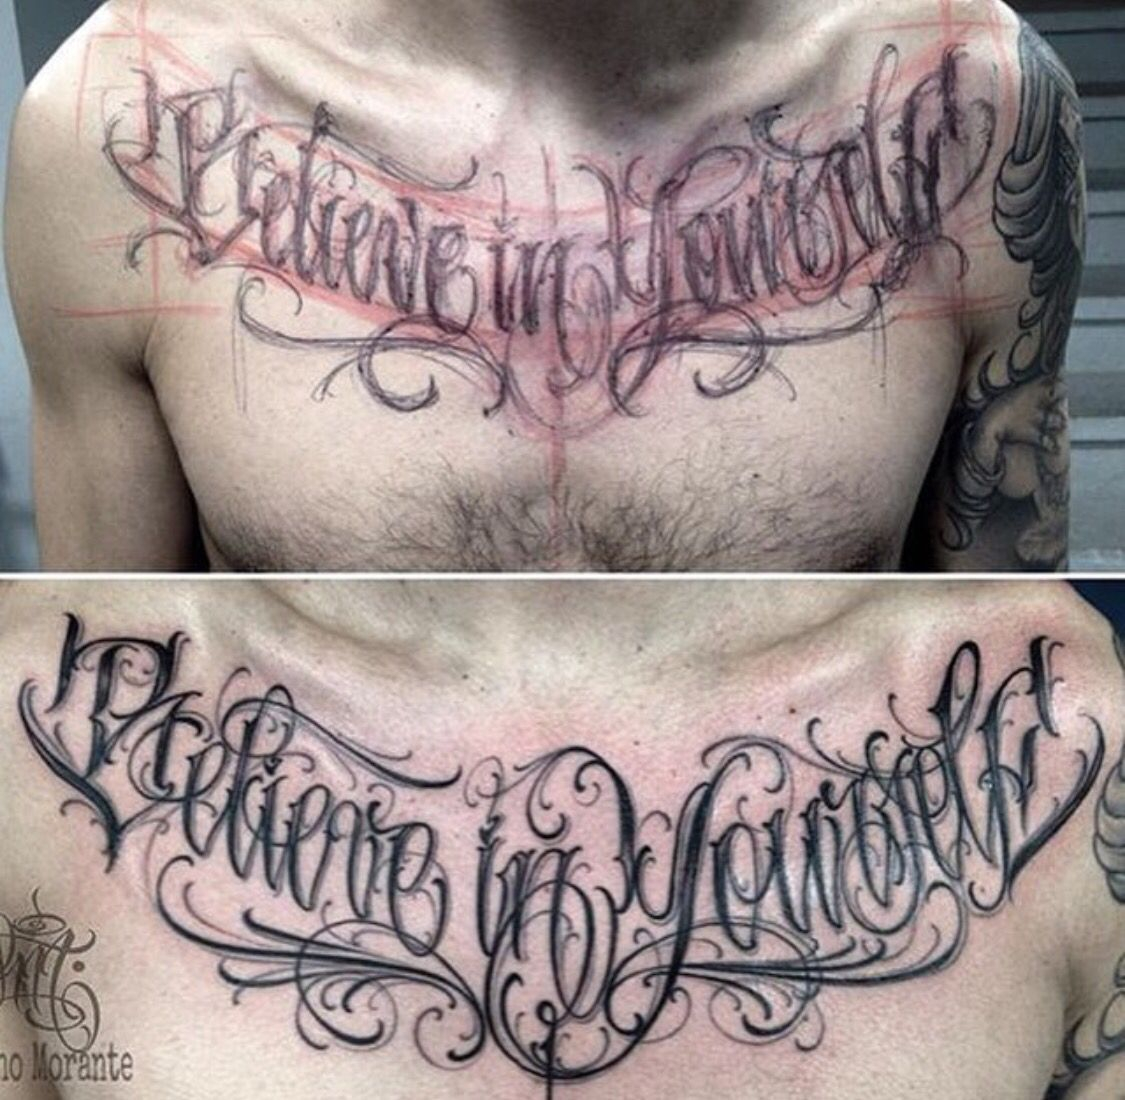 Believe In Yourself Chest Lettering Tattoo Tattoo Envy Tatuagem within dimensions 1125 X 1100